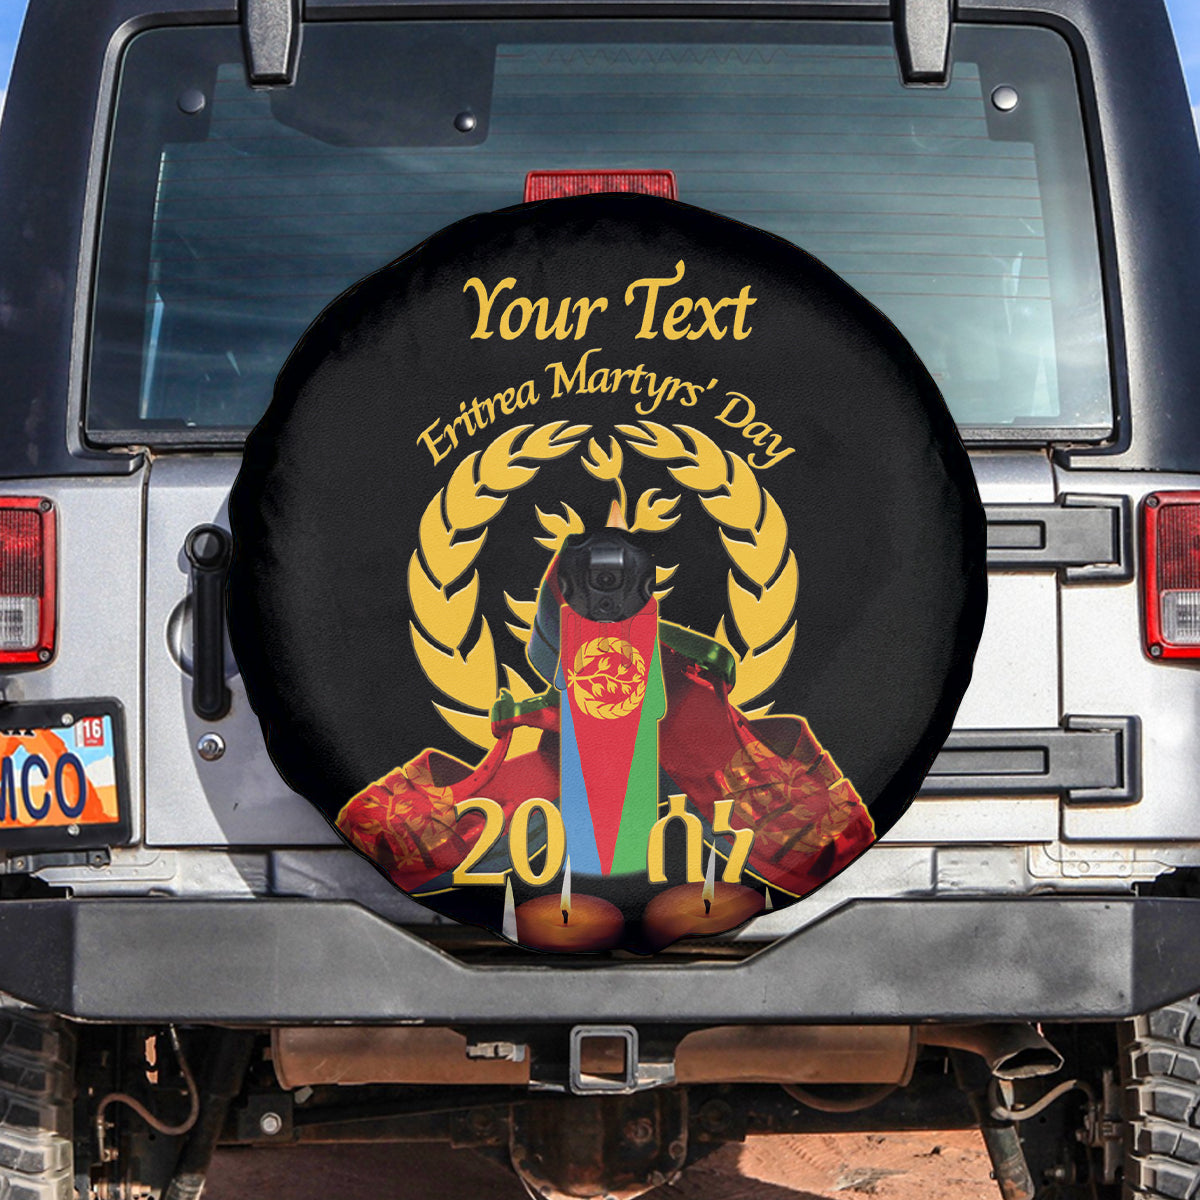 Custom Eritrea Martyrs' Day Spare Tire Cover 20 June Shida Shoes With Candles - Black